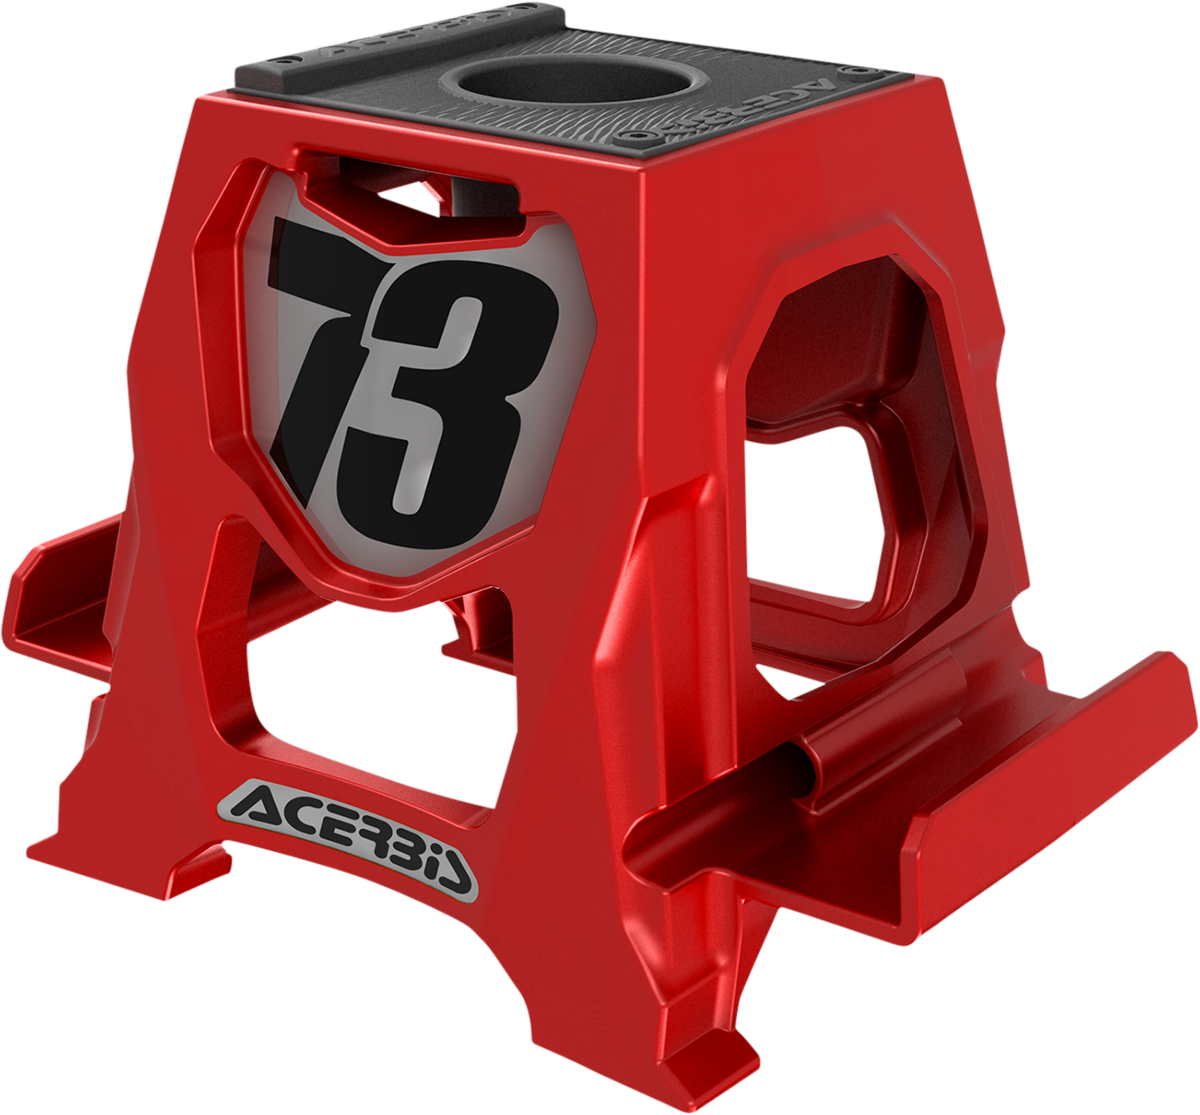 ACERBIS Phone Stand - Red 2791570227